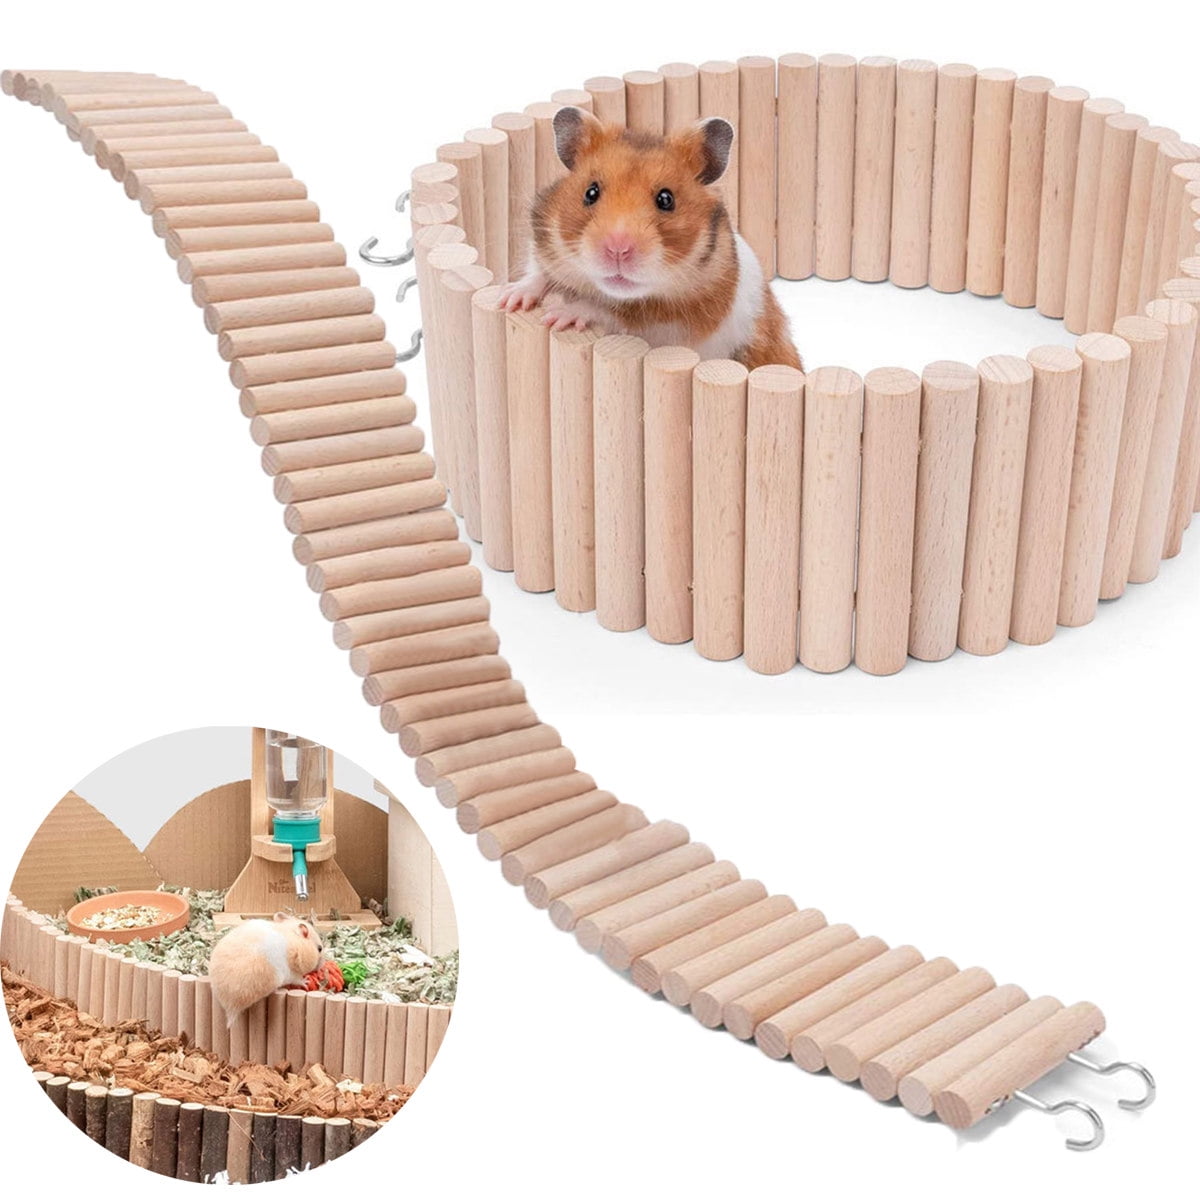 Wooden Pets Ladder Toys Cage Accessories For Hamster Bird Mouse Flexible Toy S 